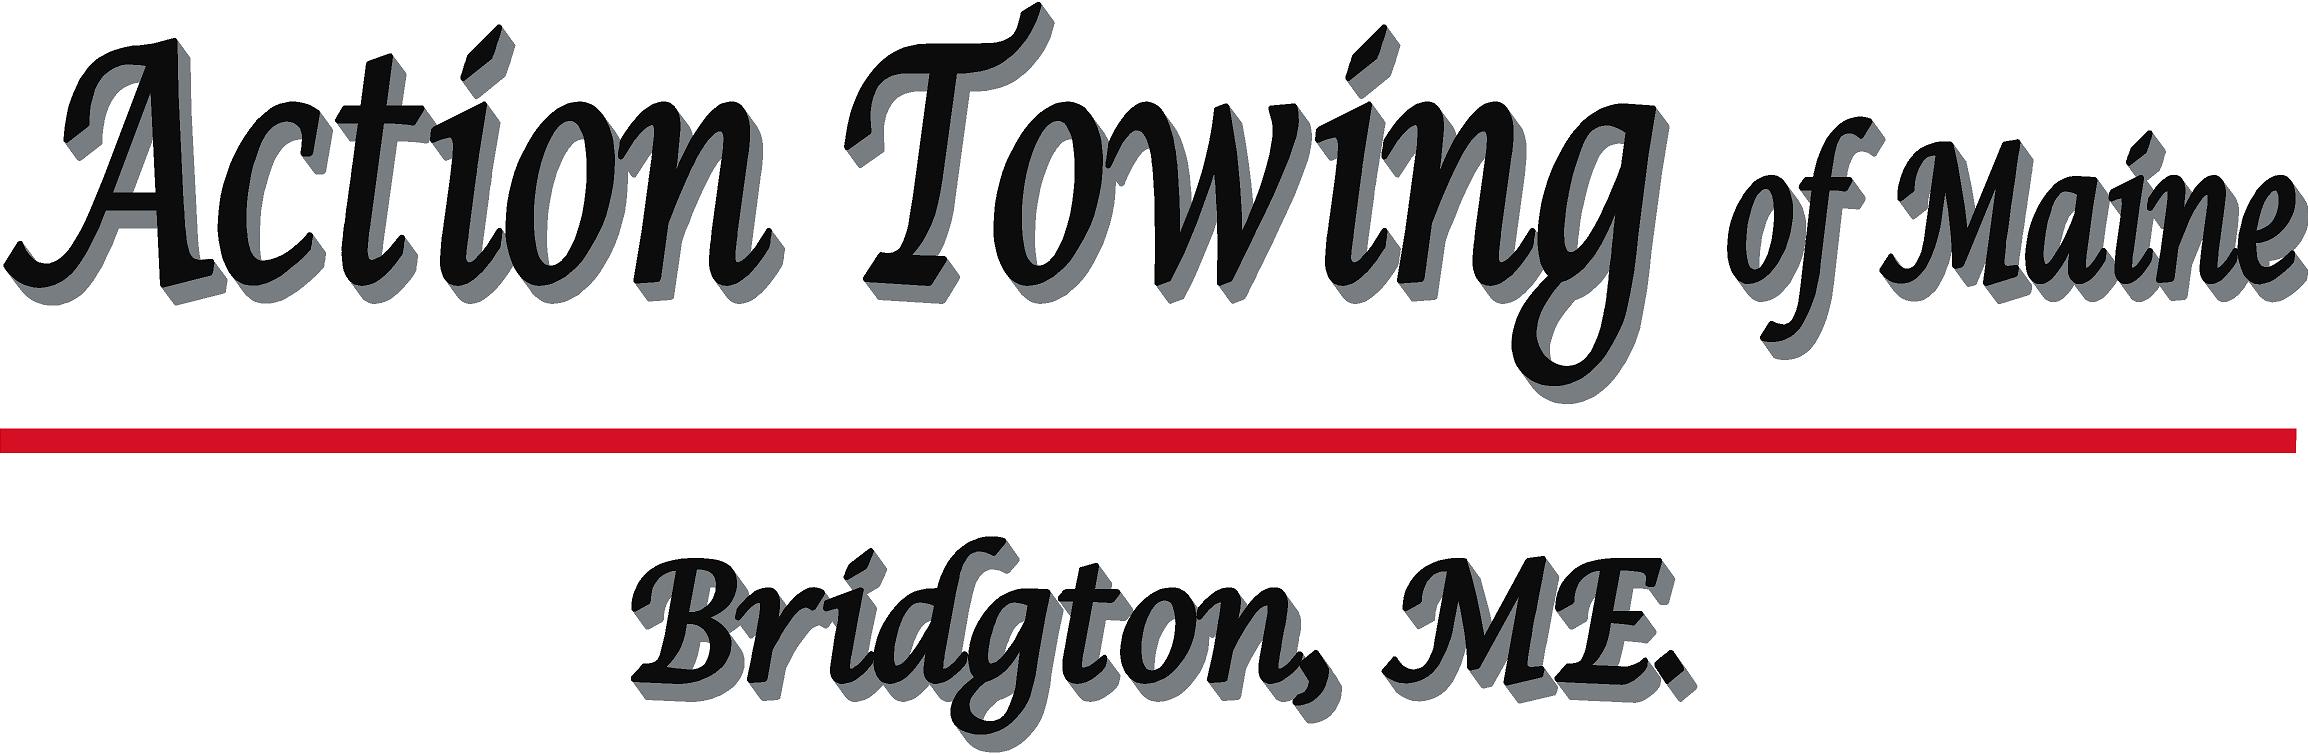 Action Towing of Maine-24 hr Towing & Recovery